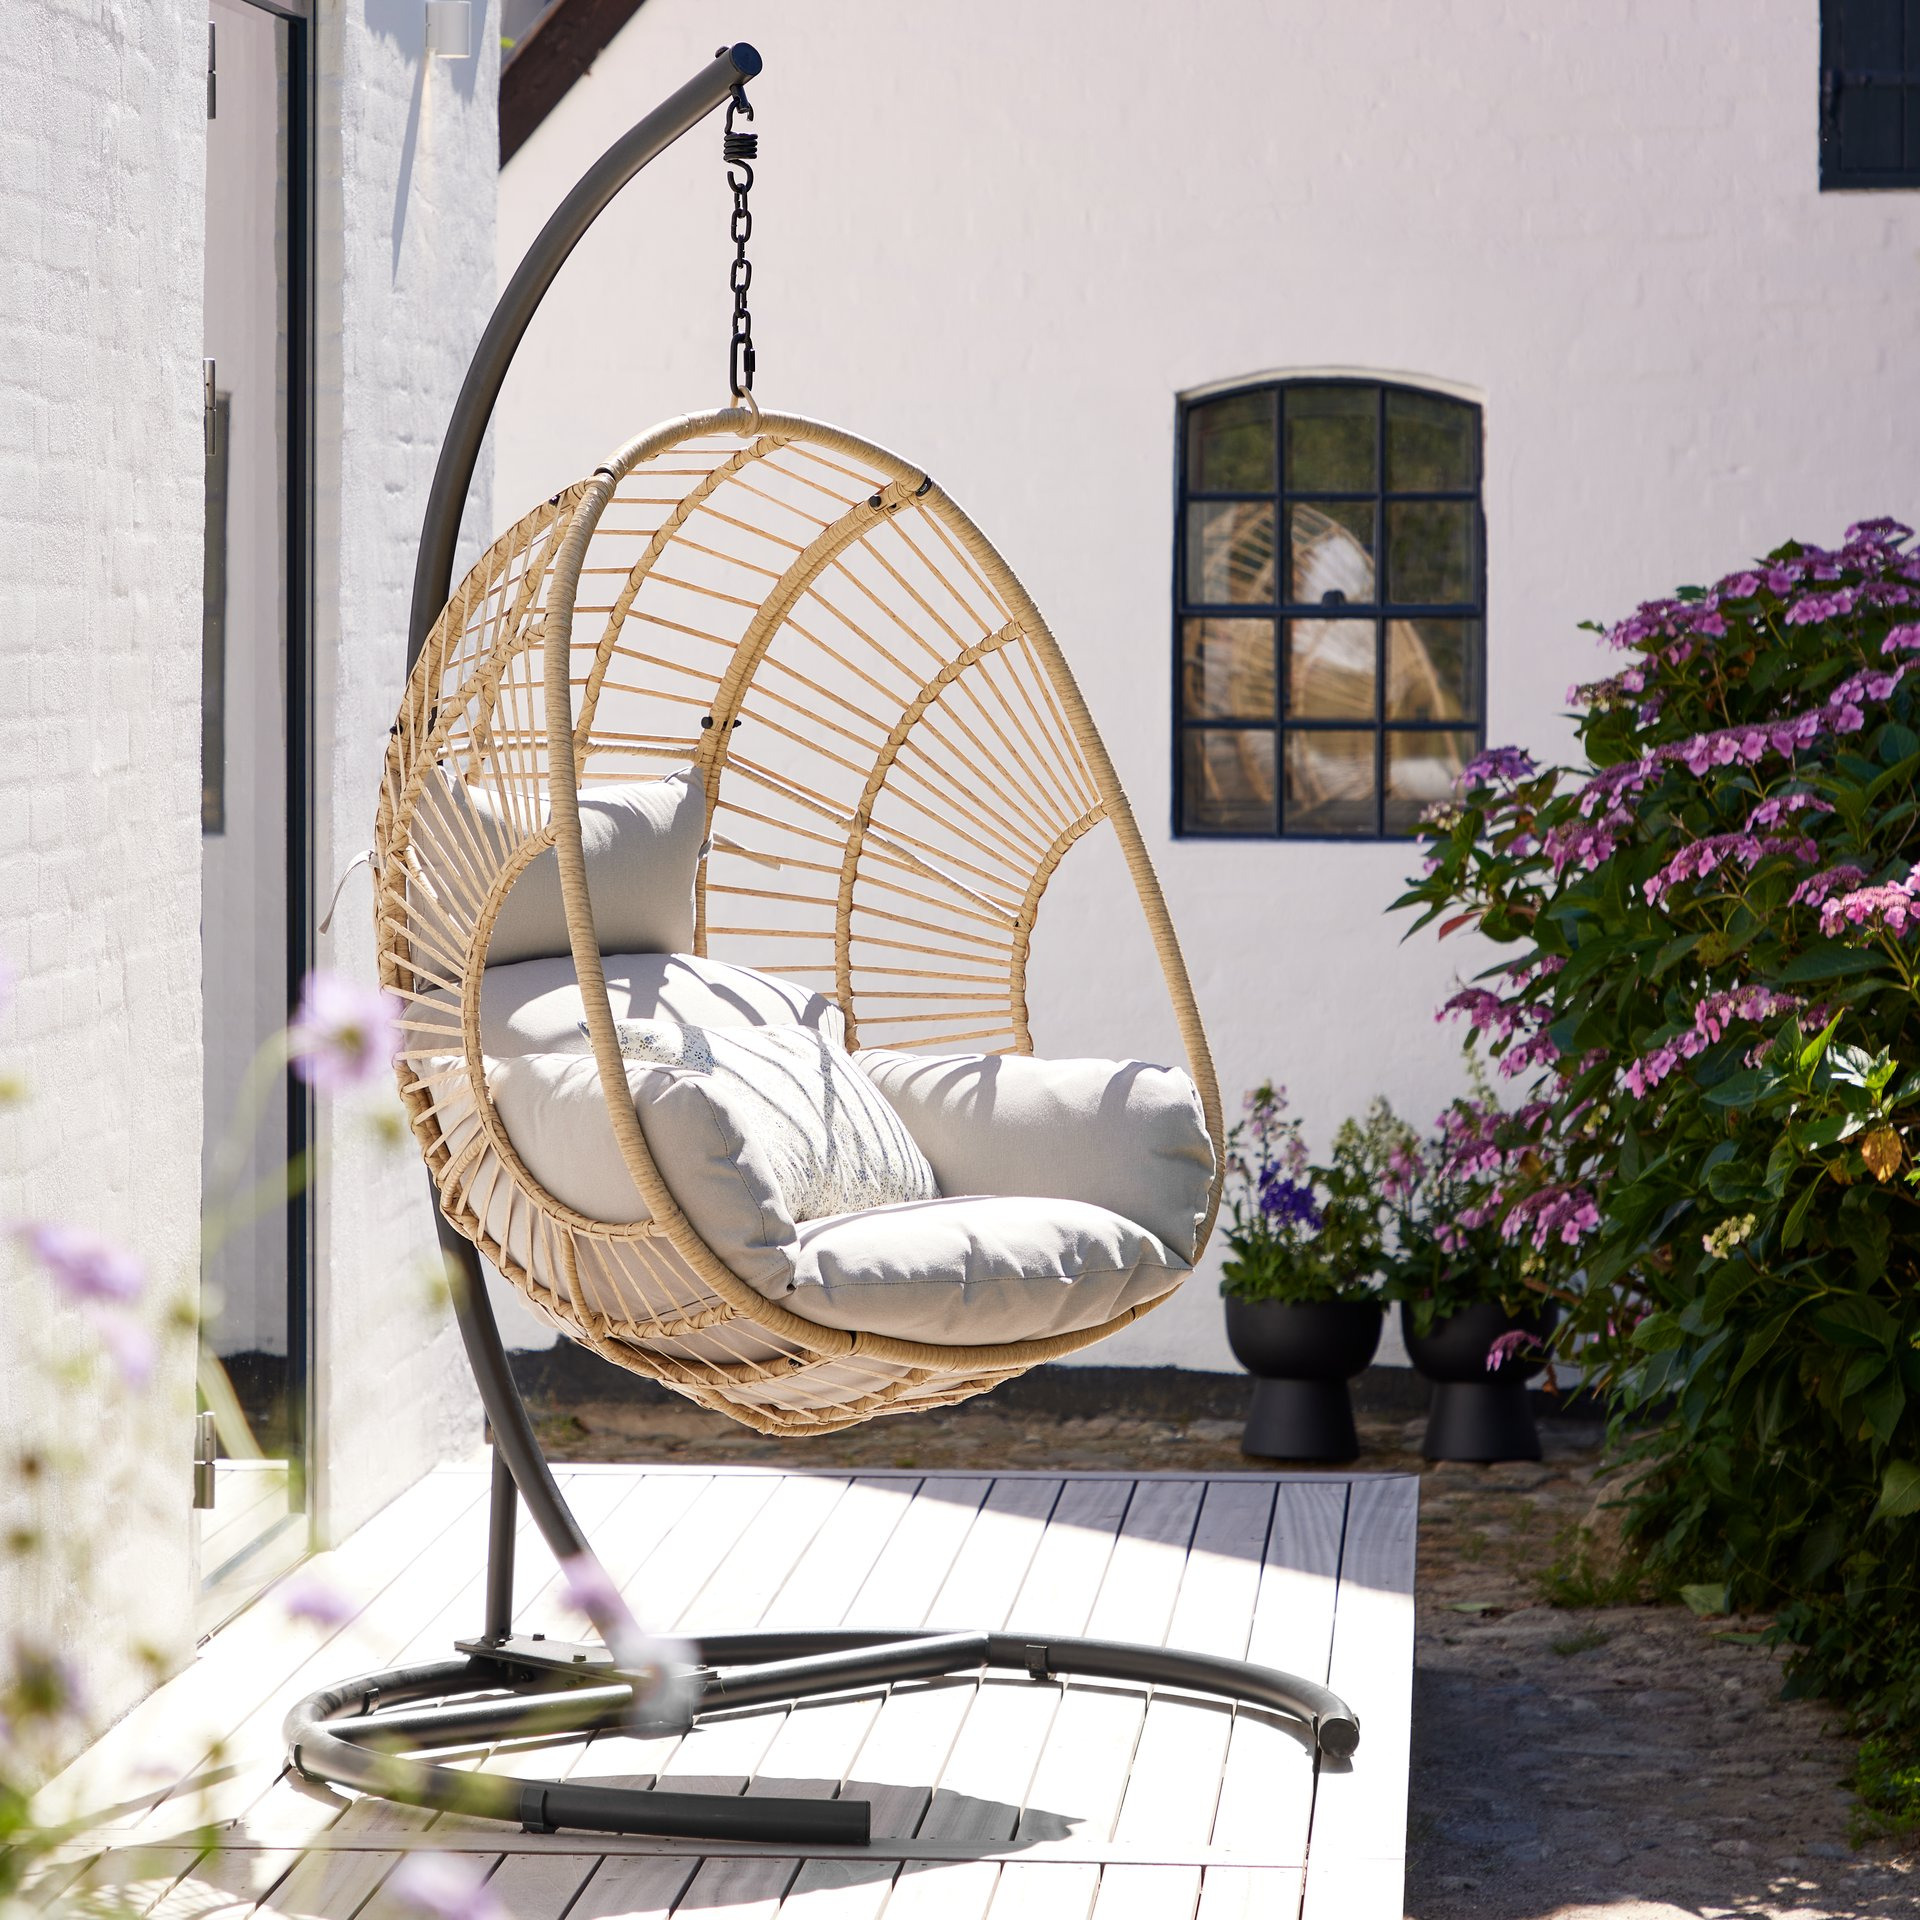 Hammock with stand on patio